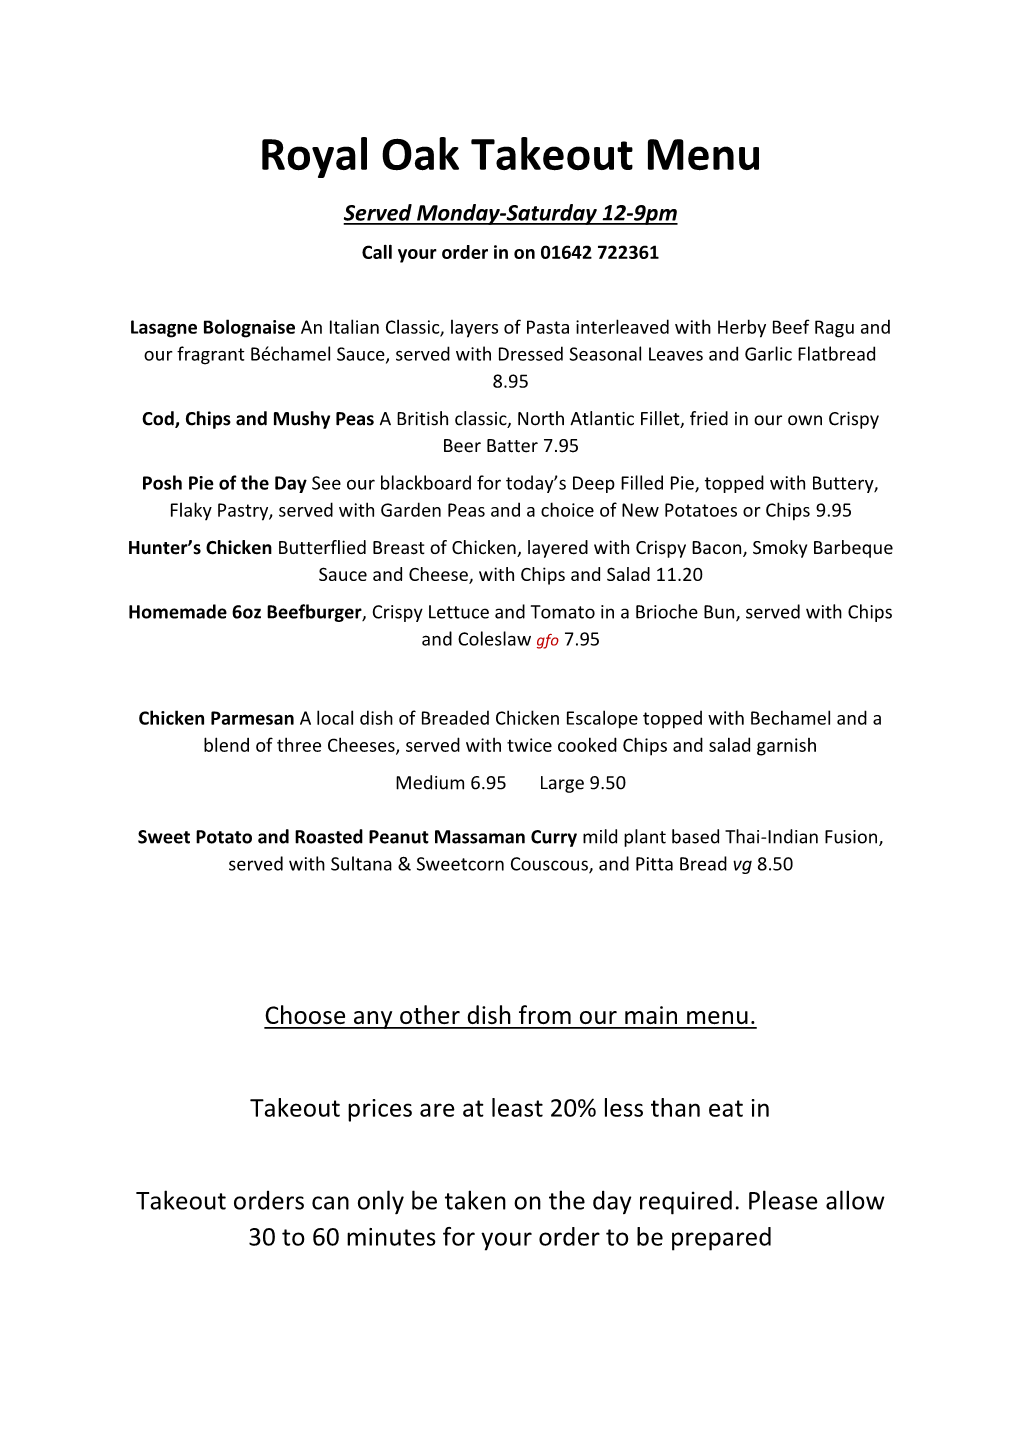 Royal Oak Takeout Menu Served Monday-Saturday 12-9Pm Call Your Order in on 01642 722361